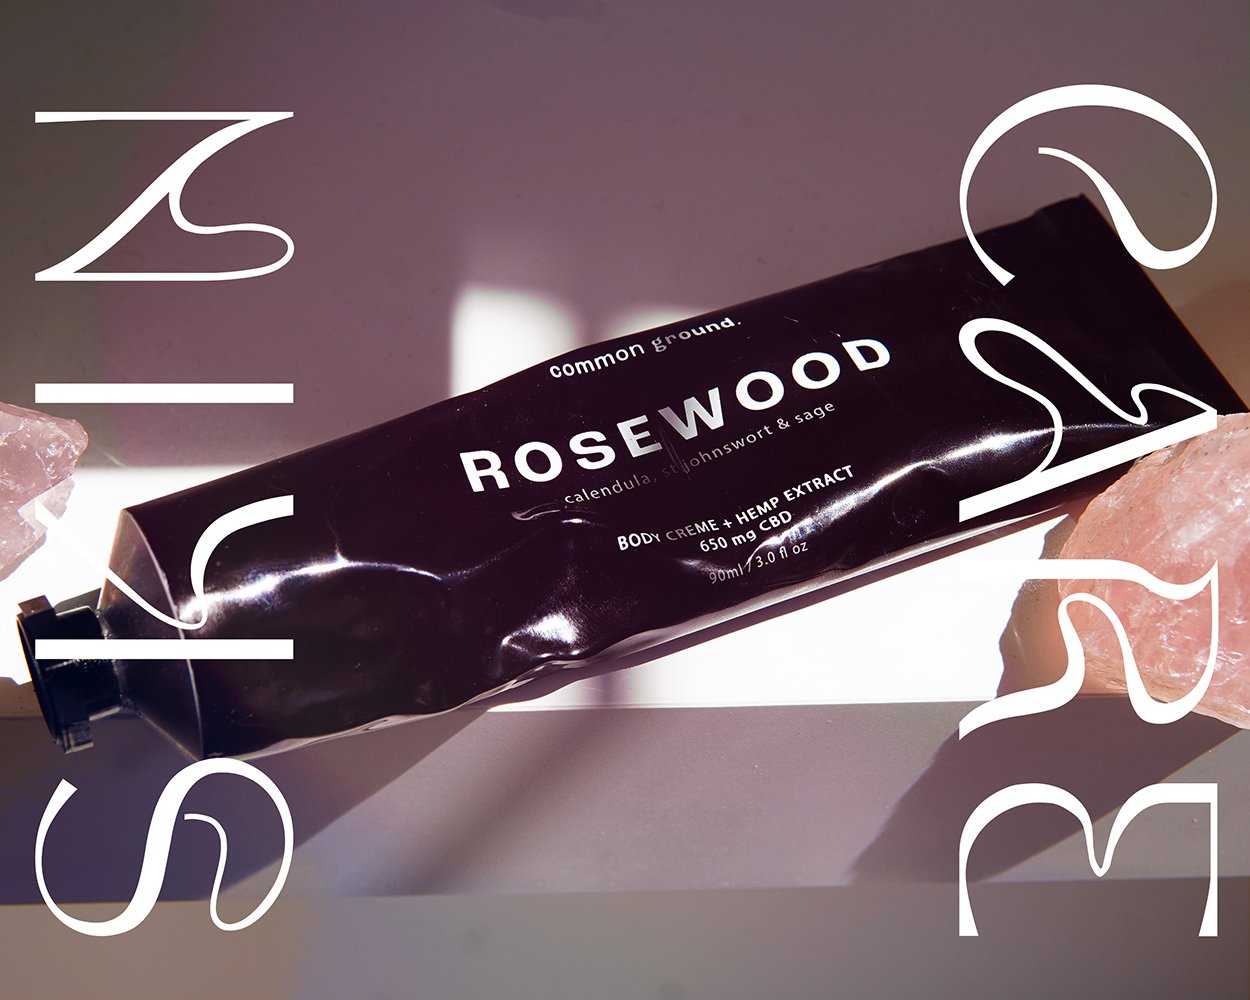 aura rosewood skin care graphic resized for web.jpg